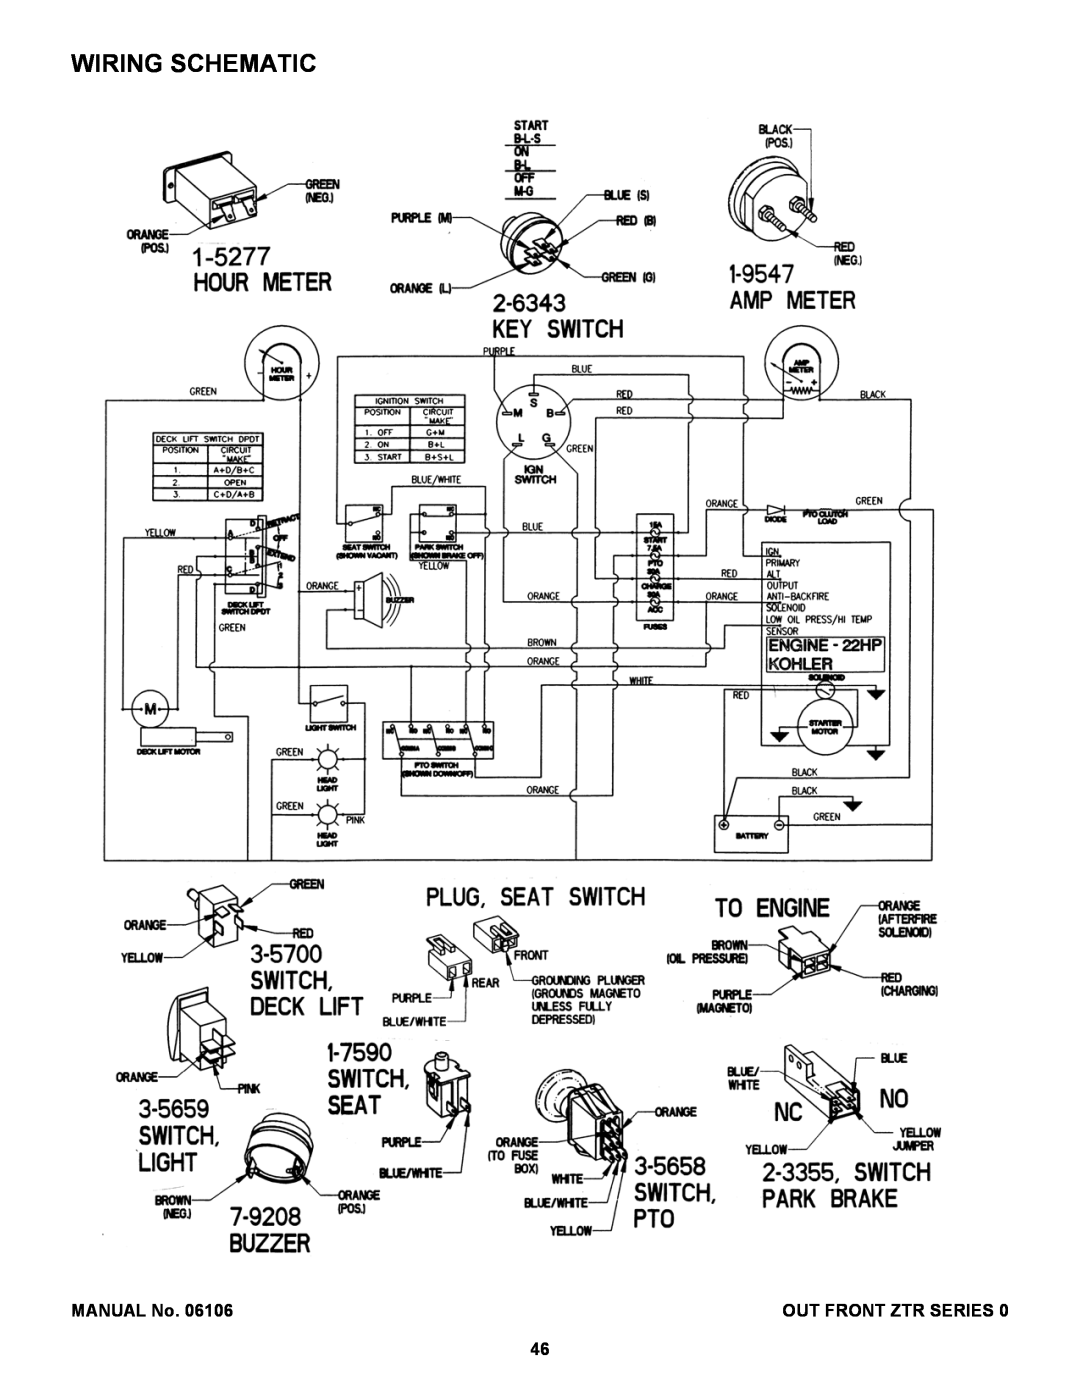 Snapper ZF2500KH, ZF2200K manual Wiring Schematic, MANUAL No, Out Front Ztr Series 